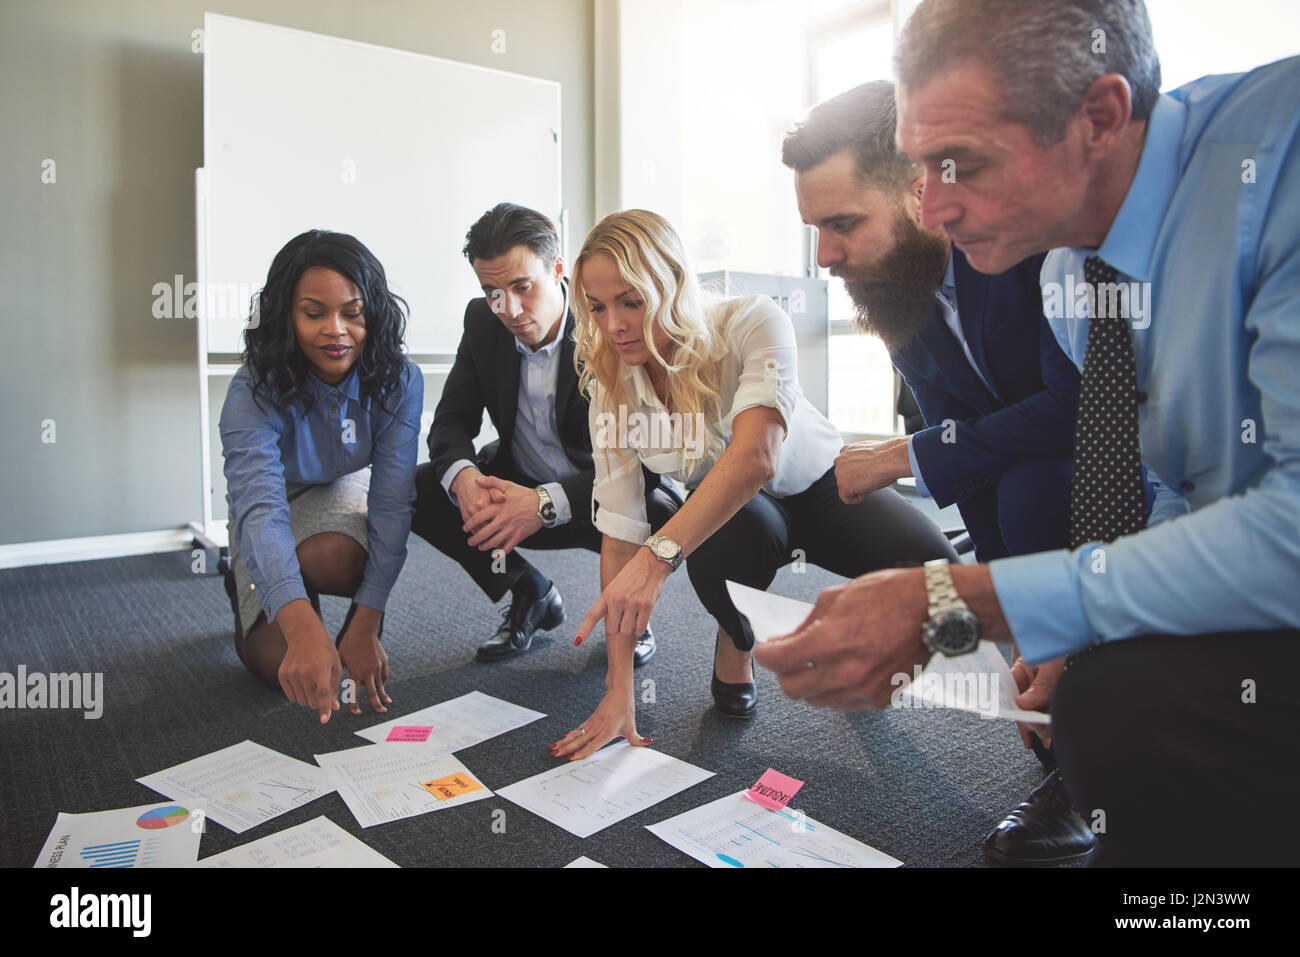 Men and woman brainstorming in office crouching to look at different documents Stock Photo